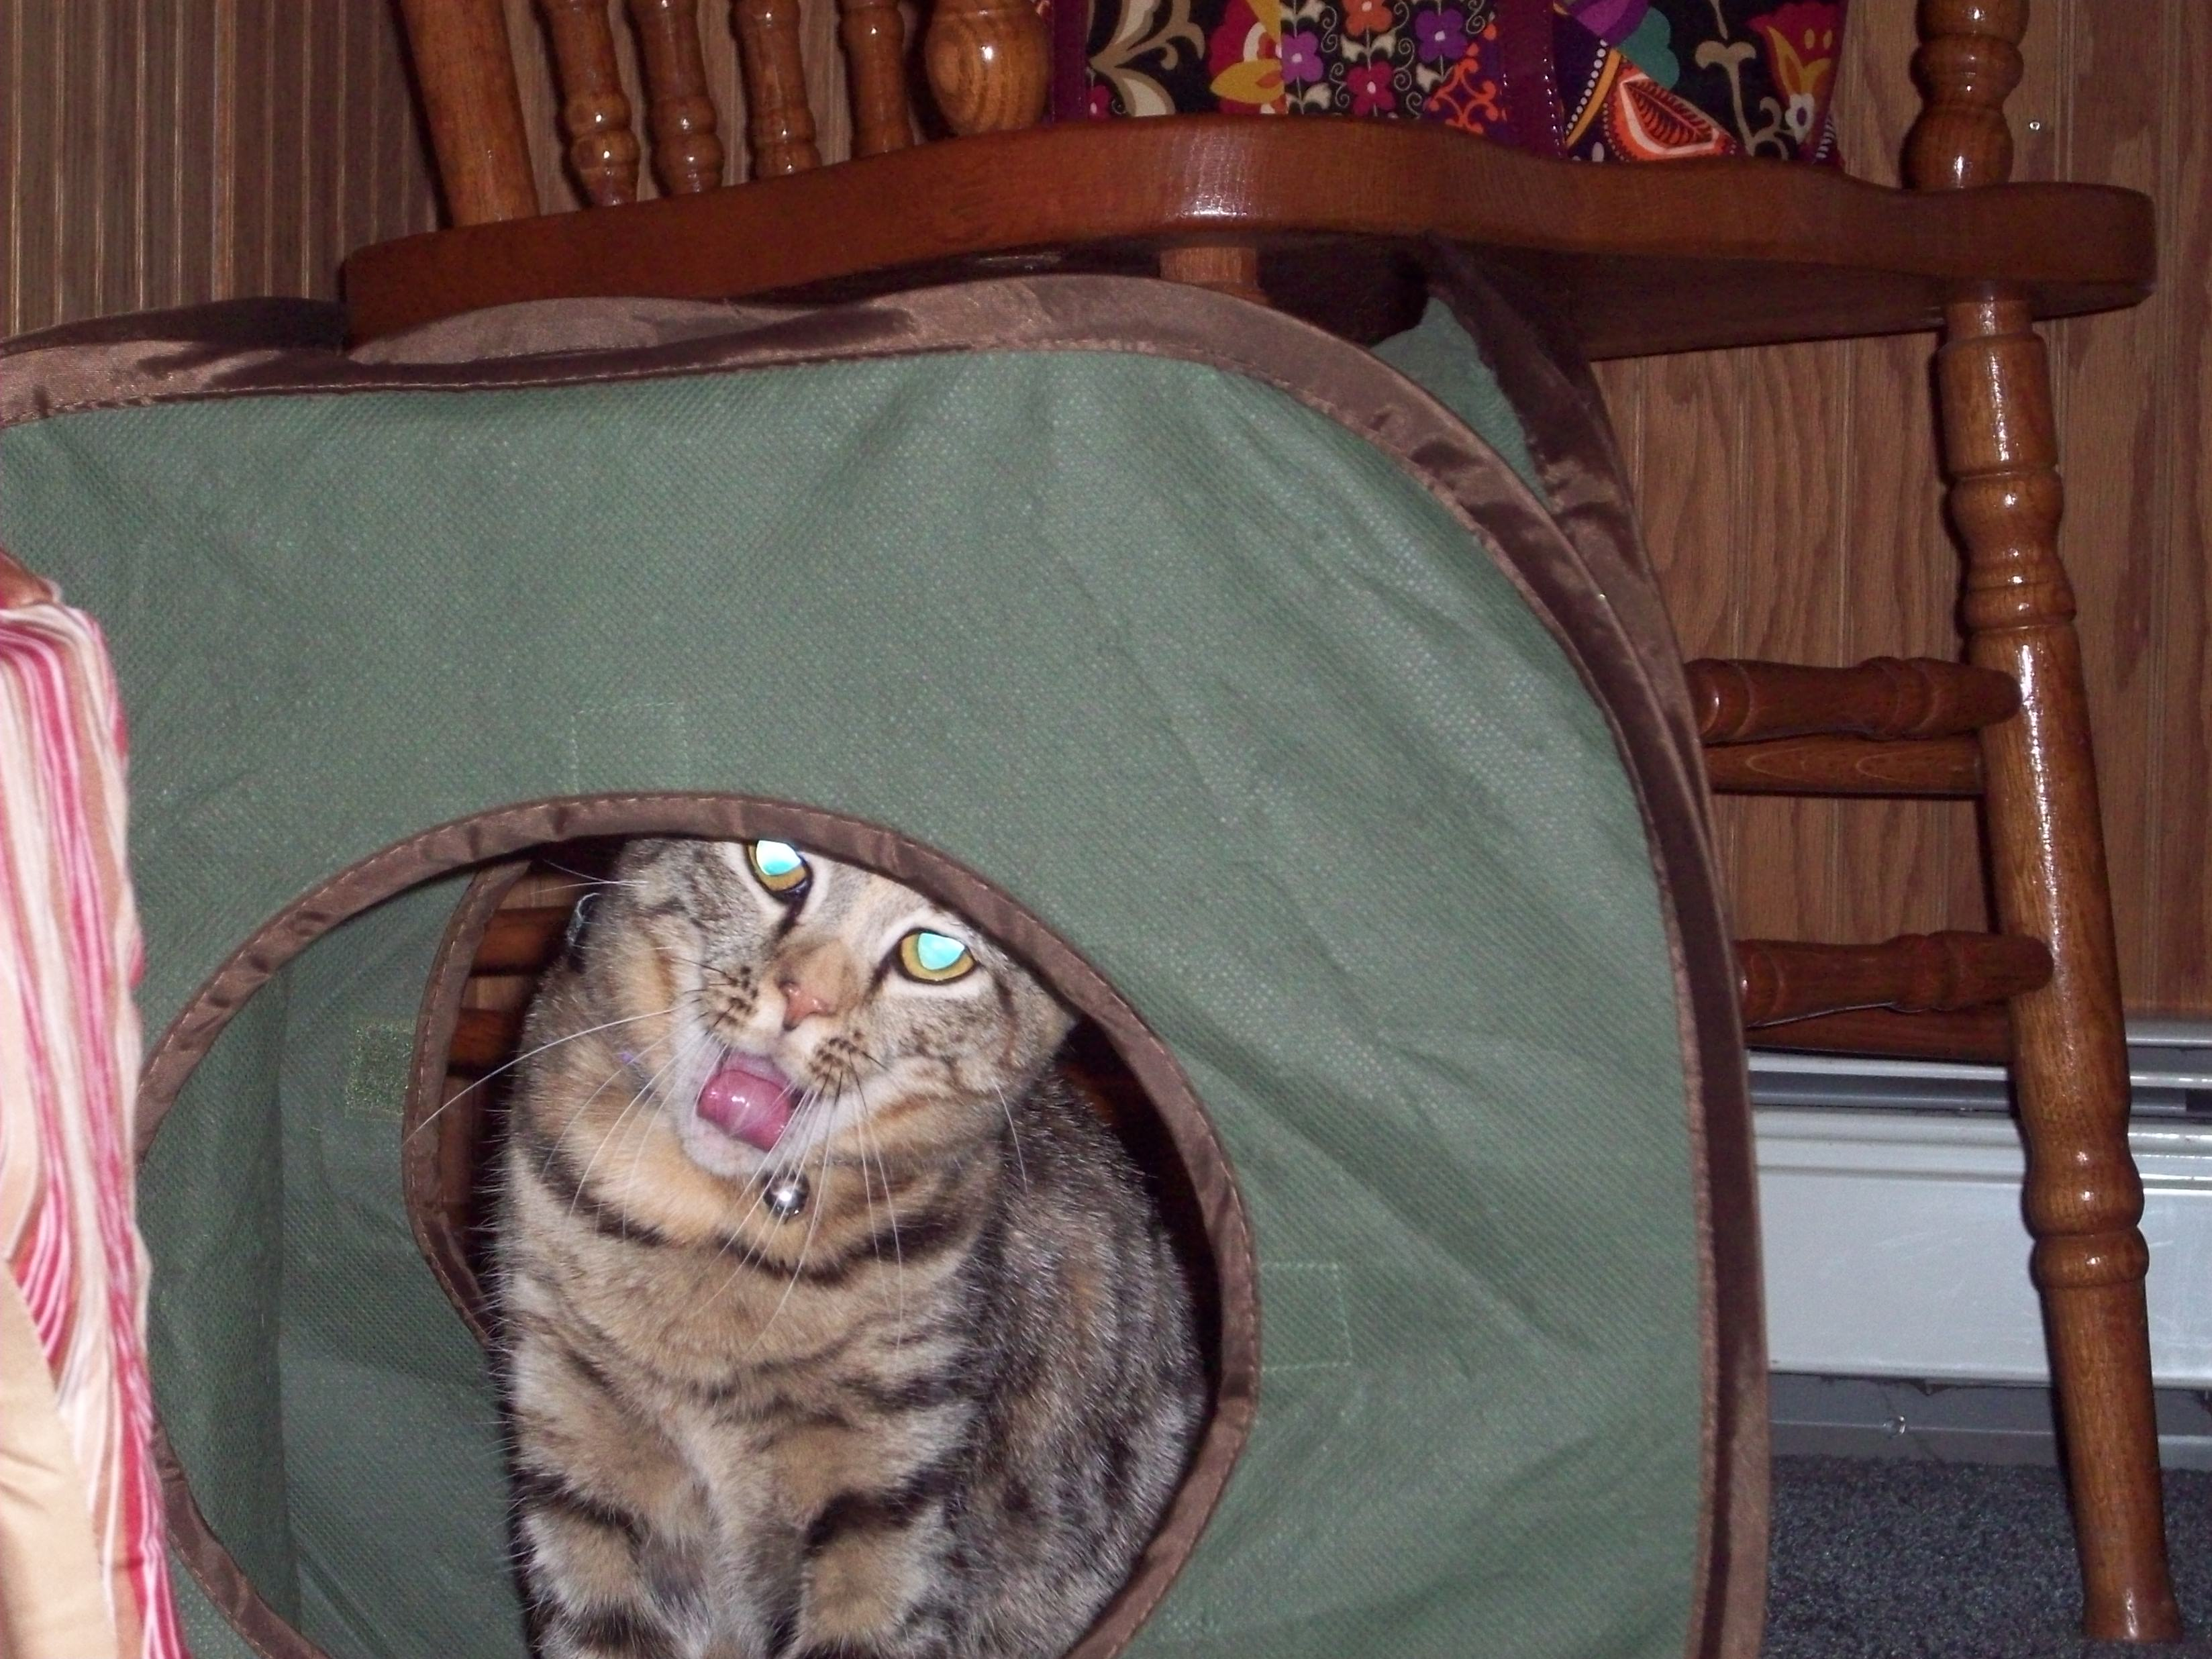 Photograph of a brown tabby cat sitting in what looks like a laundry basket or partially constructed tent